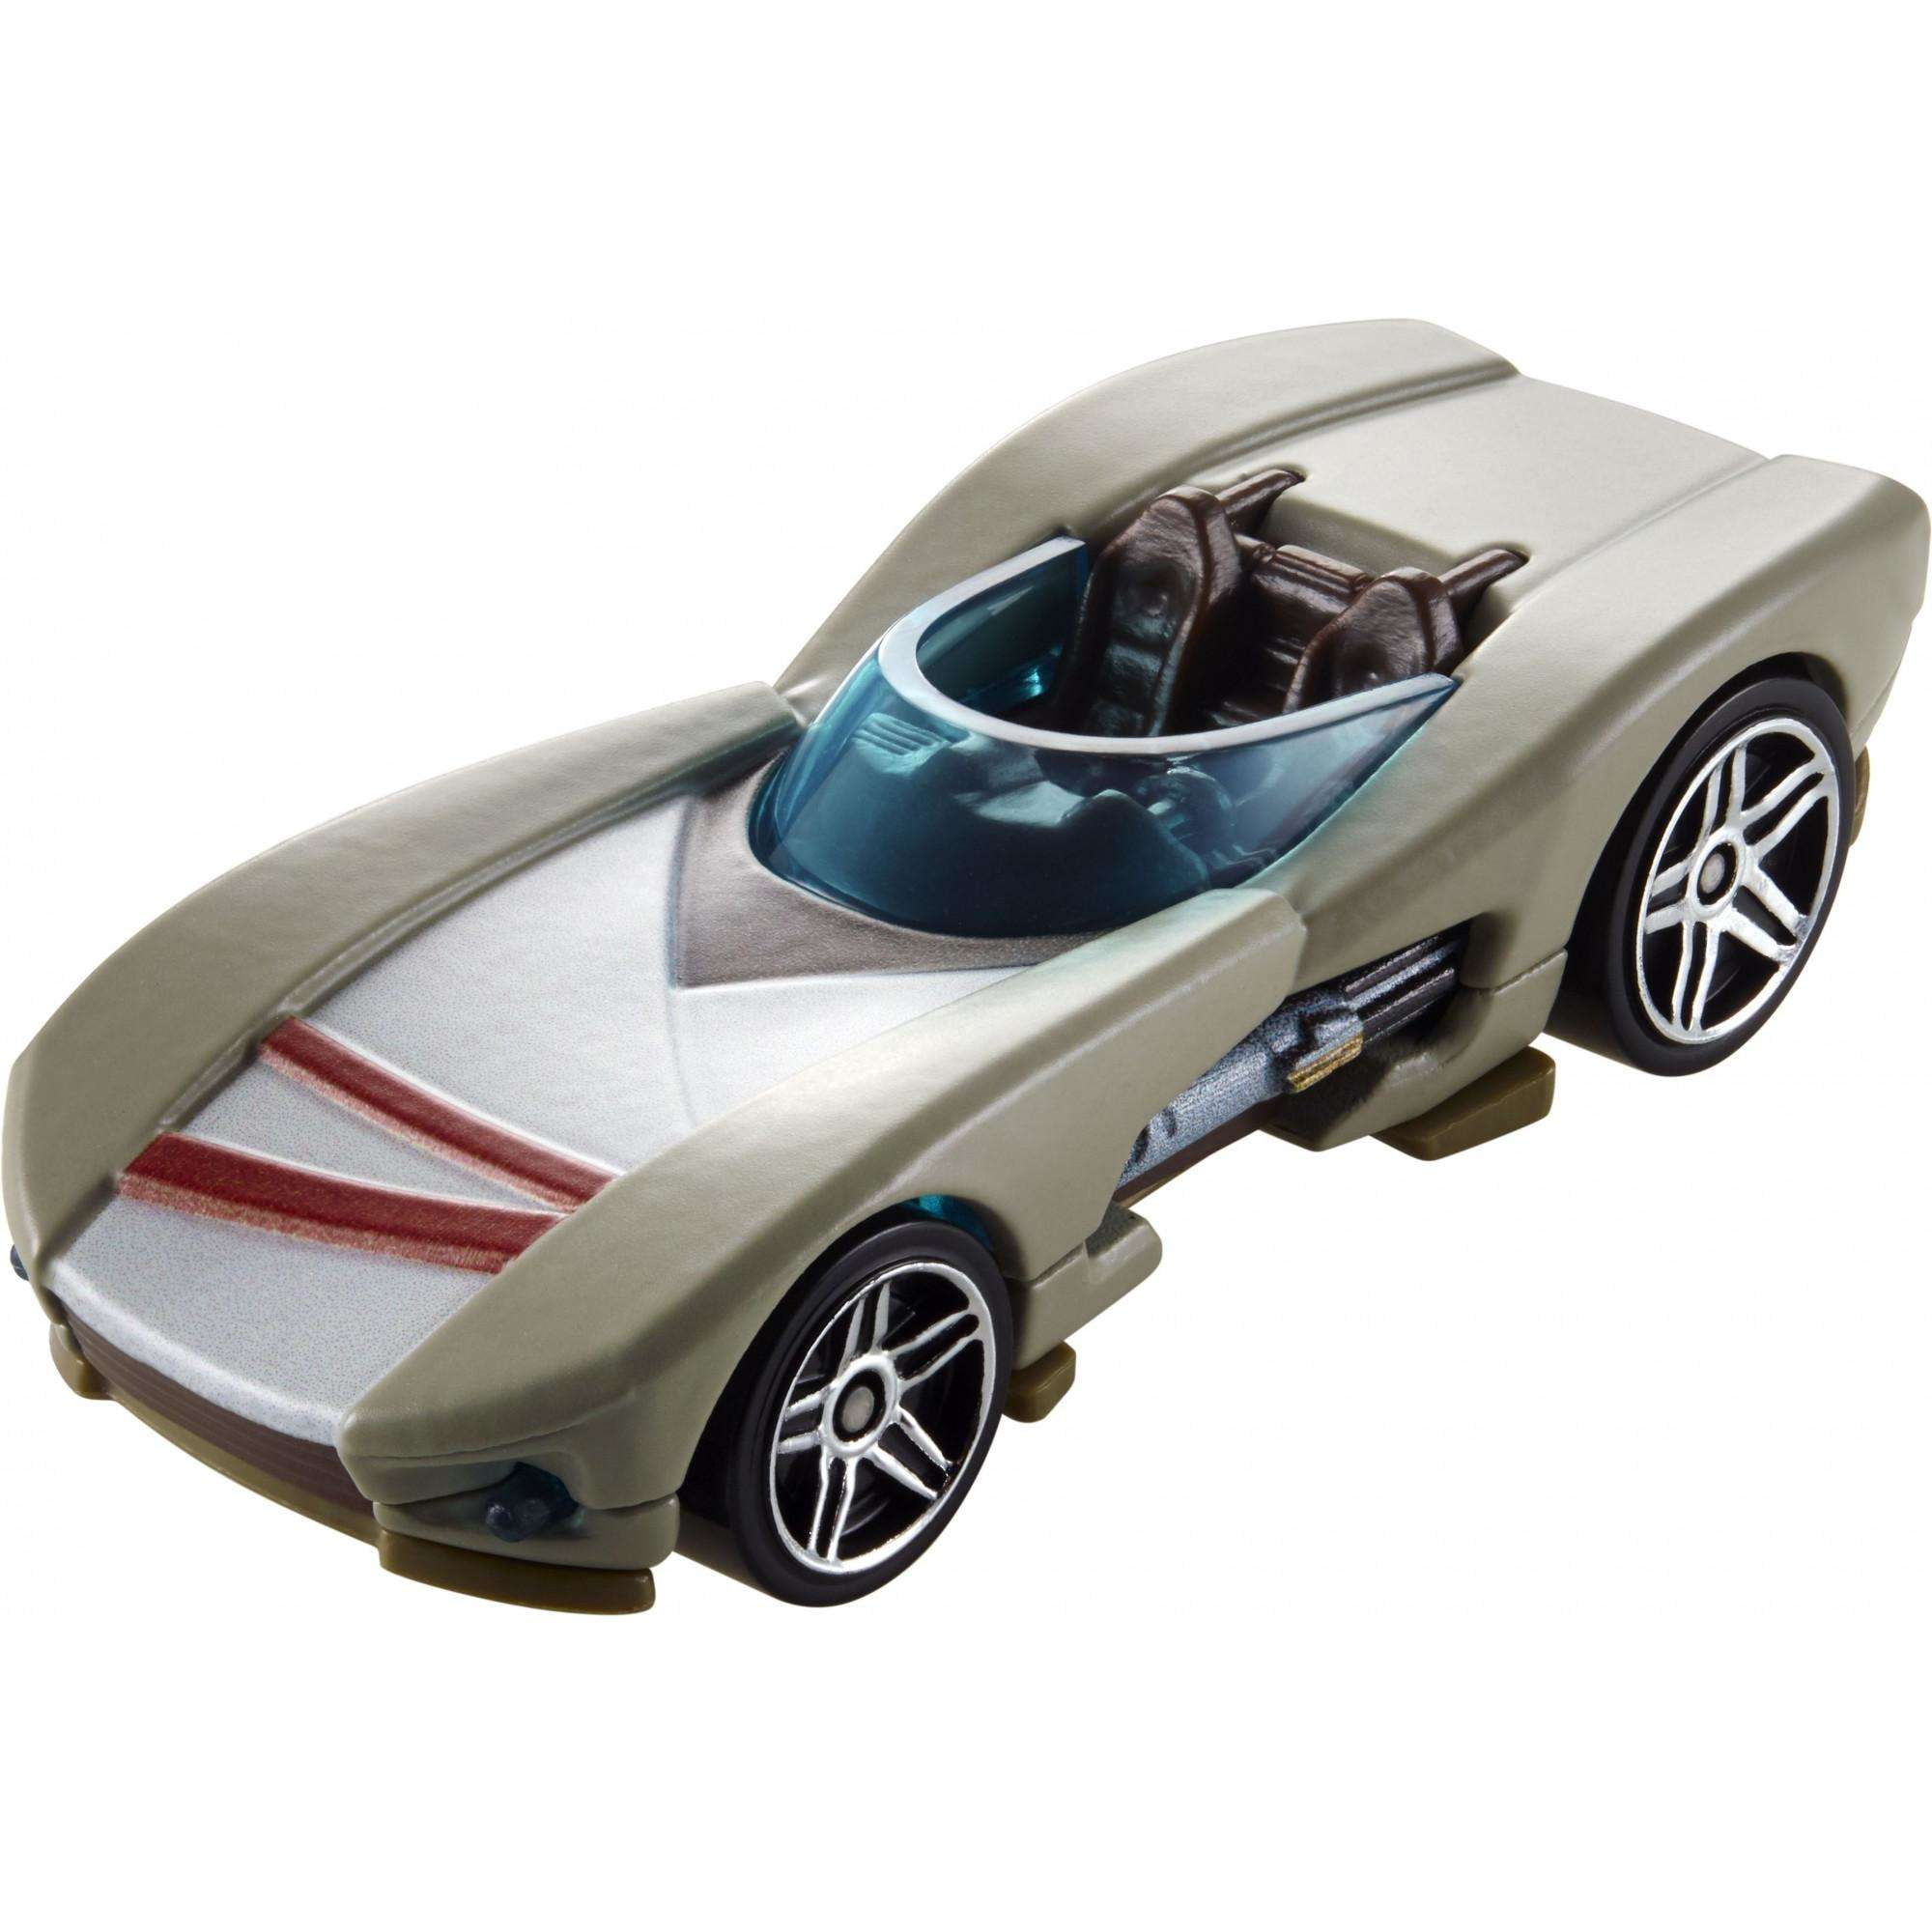 New HOT WHEELS Star Wars Carships Character Cars The Last Jedi Pack 2+MORE 2017 